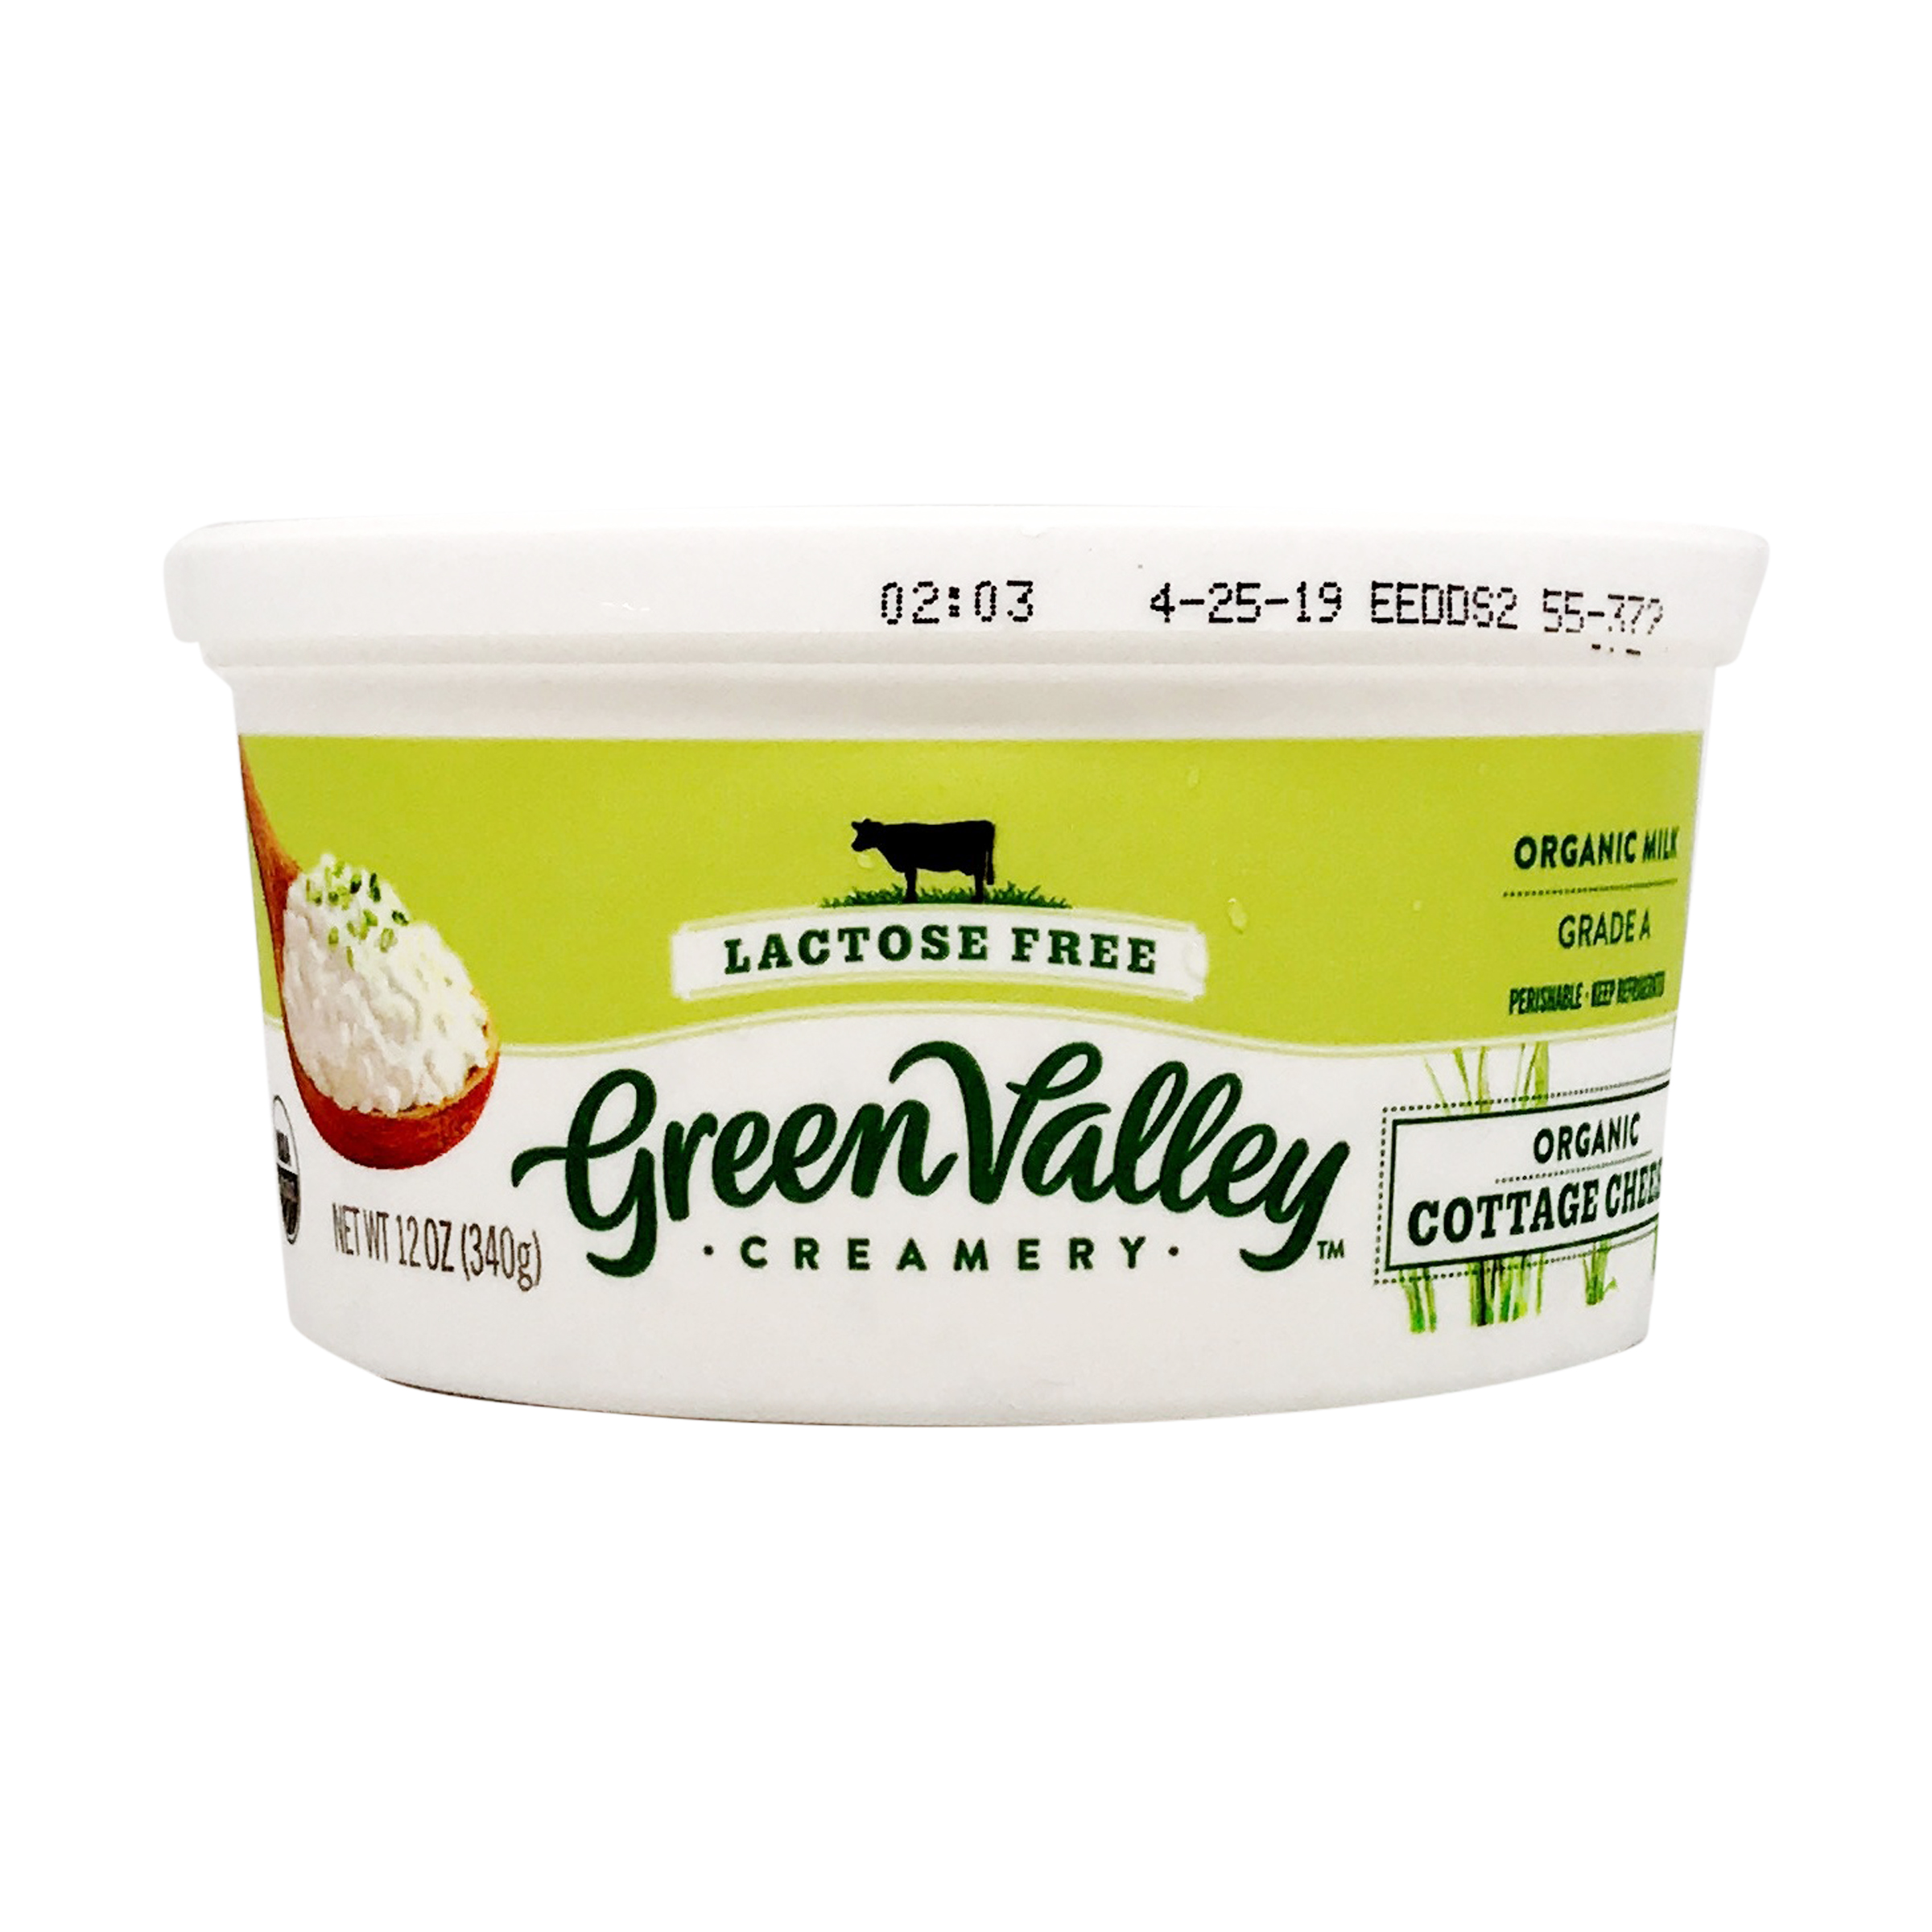 Organic Lactose Free Cottage Cheese 12 Oz Green Valley Creamery